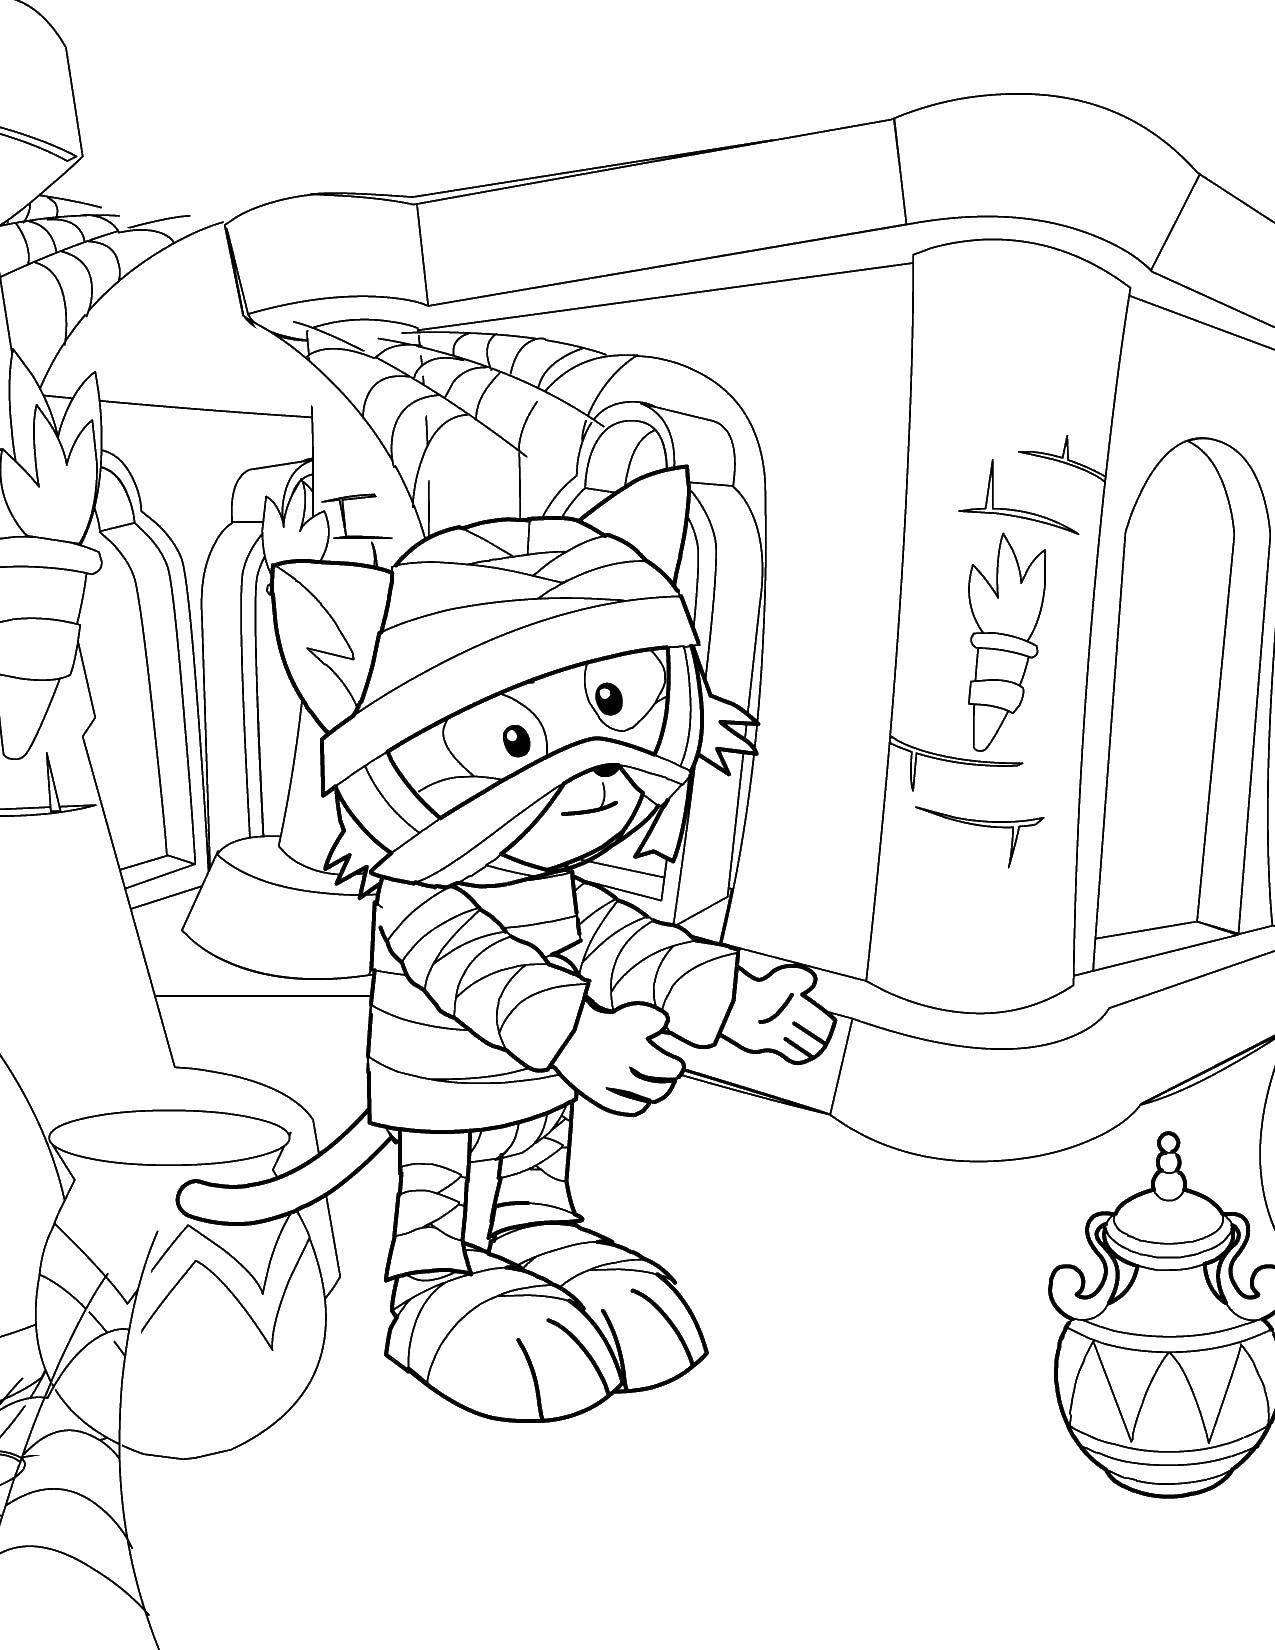 Coloring The cat mummy. Category The mummy. Tags:  The mummy.